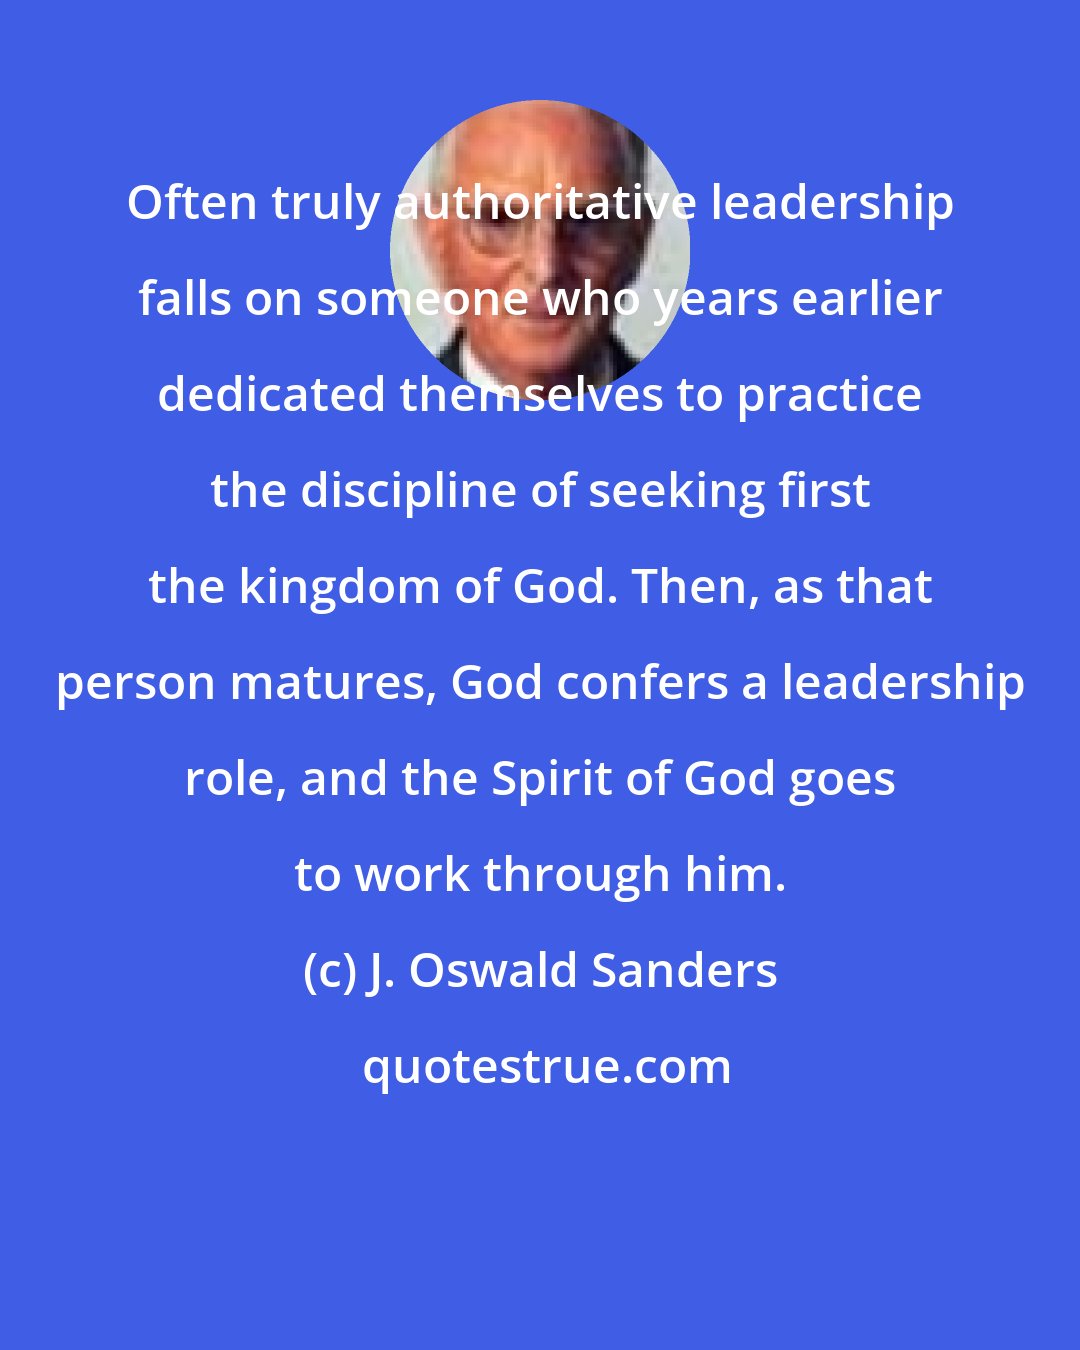 J. Oswald Sanders: Often truly authoritative leadership falls on someone who years earlier dedicated themselves to practice the discipline of seeking first the kingdom of God. Then, as that person matures, God confers a leadership role, and the Spirit of God goes to work through him.